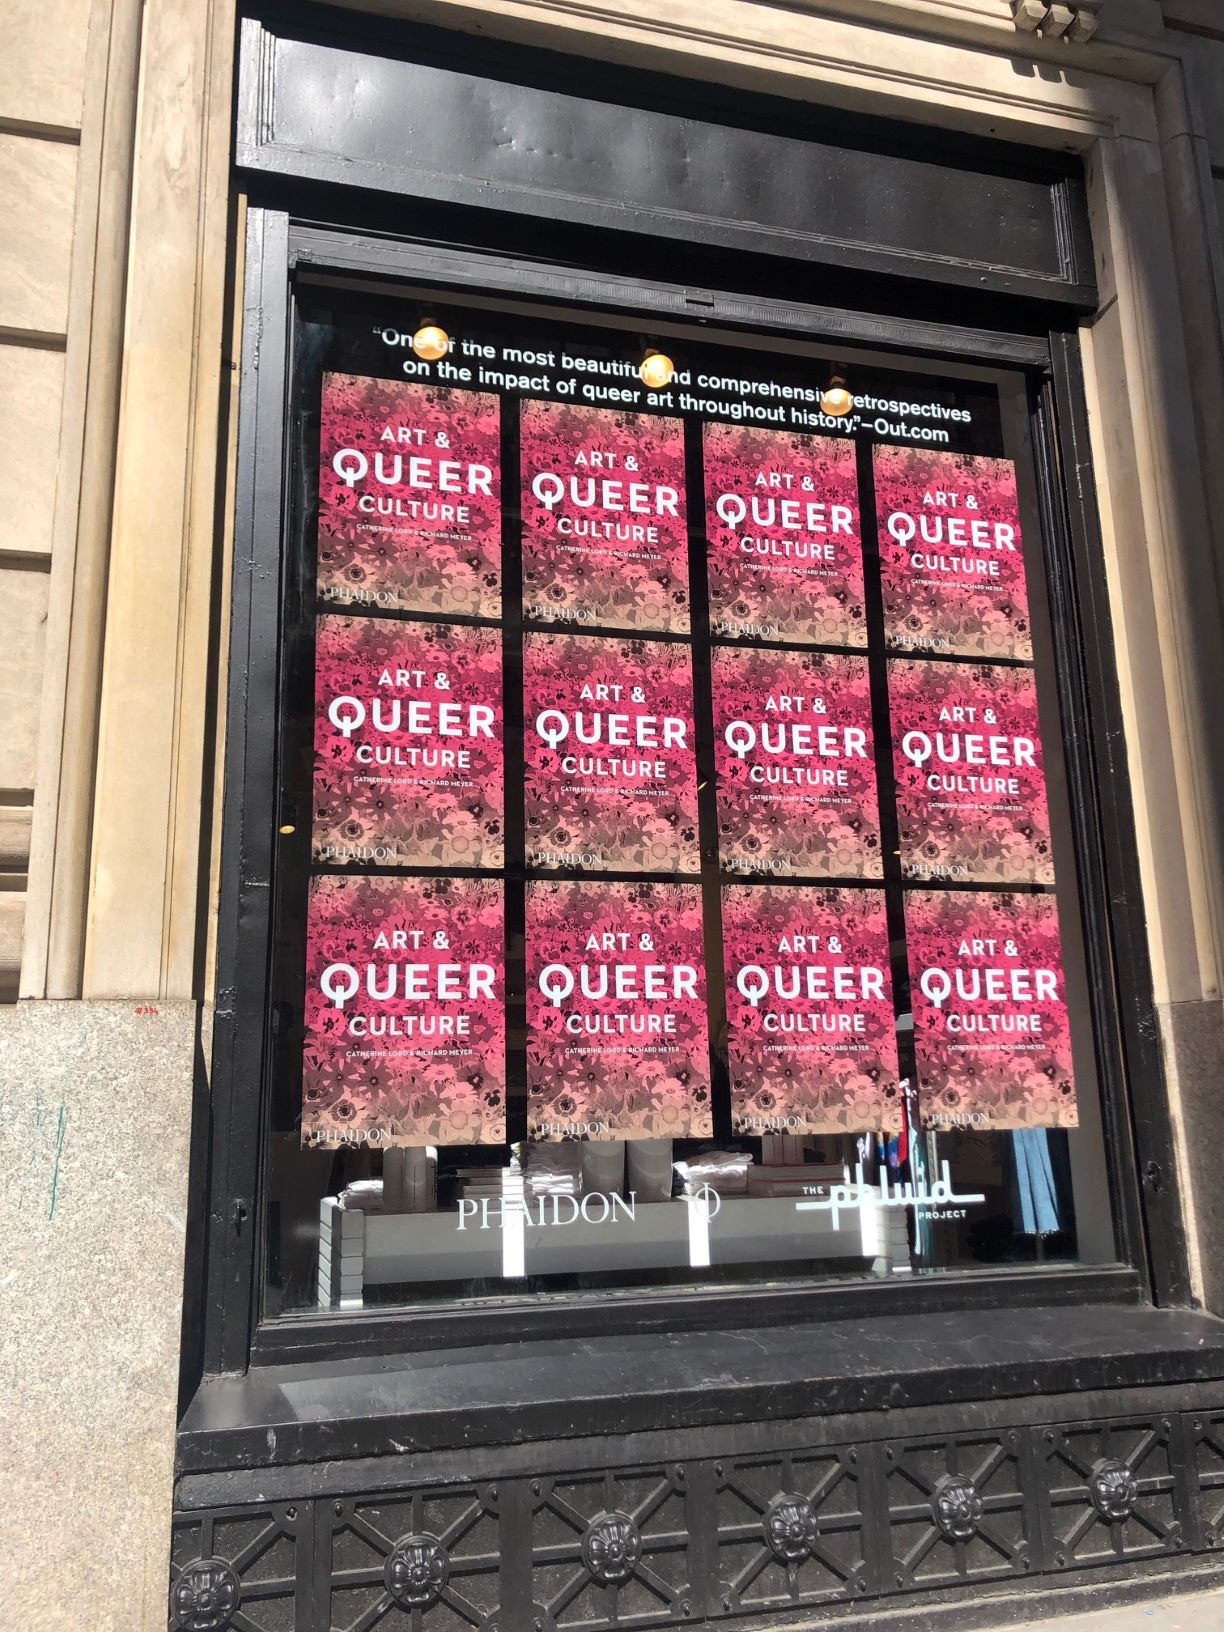 Art & Queer Culture on display in the windows of The Phluid Project, Manhattan